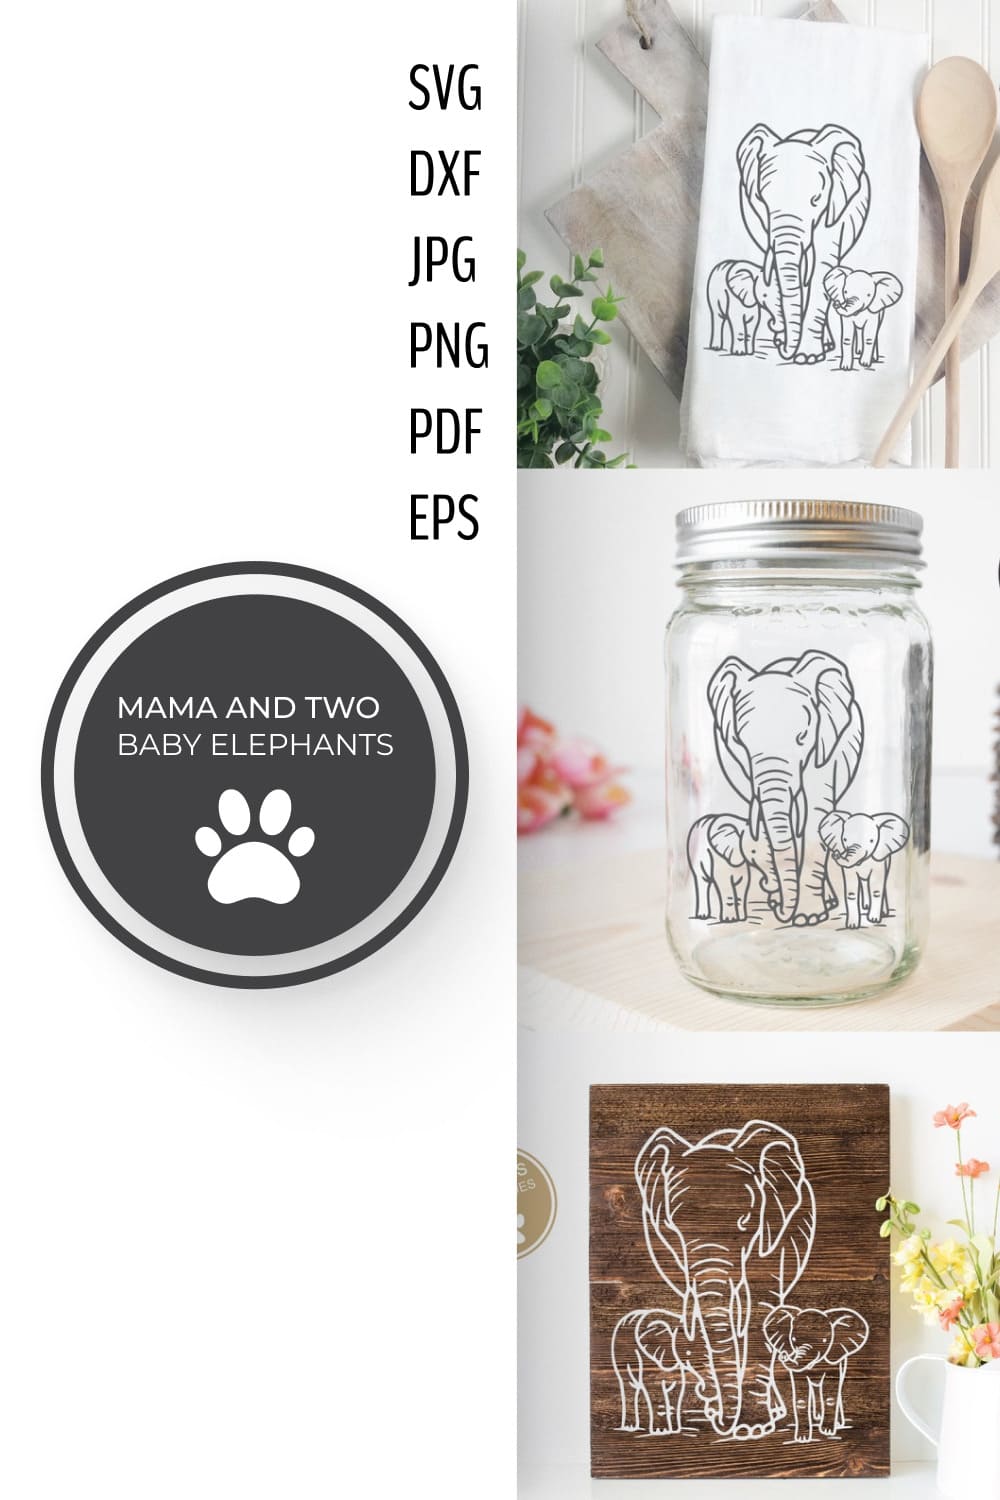 Mama and two Baby Elephants Clipart SVG Pinterest collage image by MasterBundles.